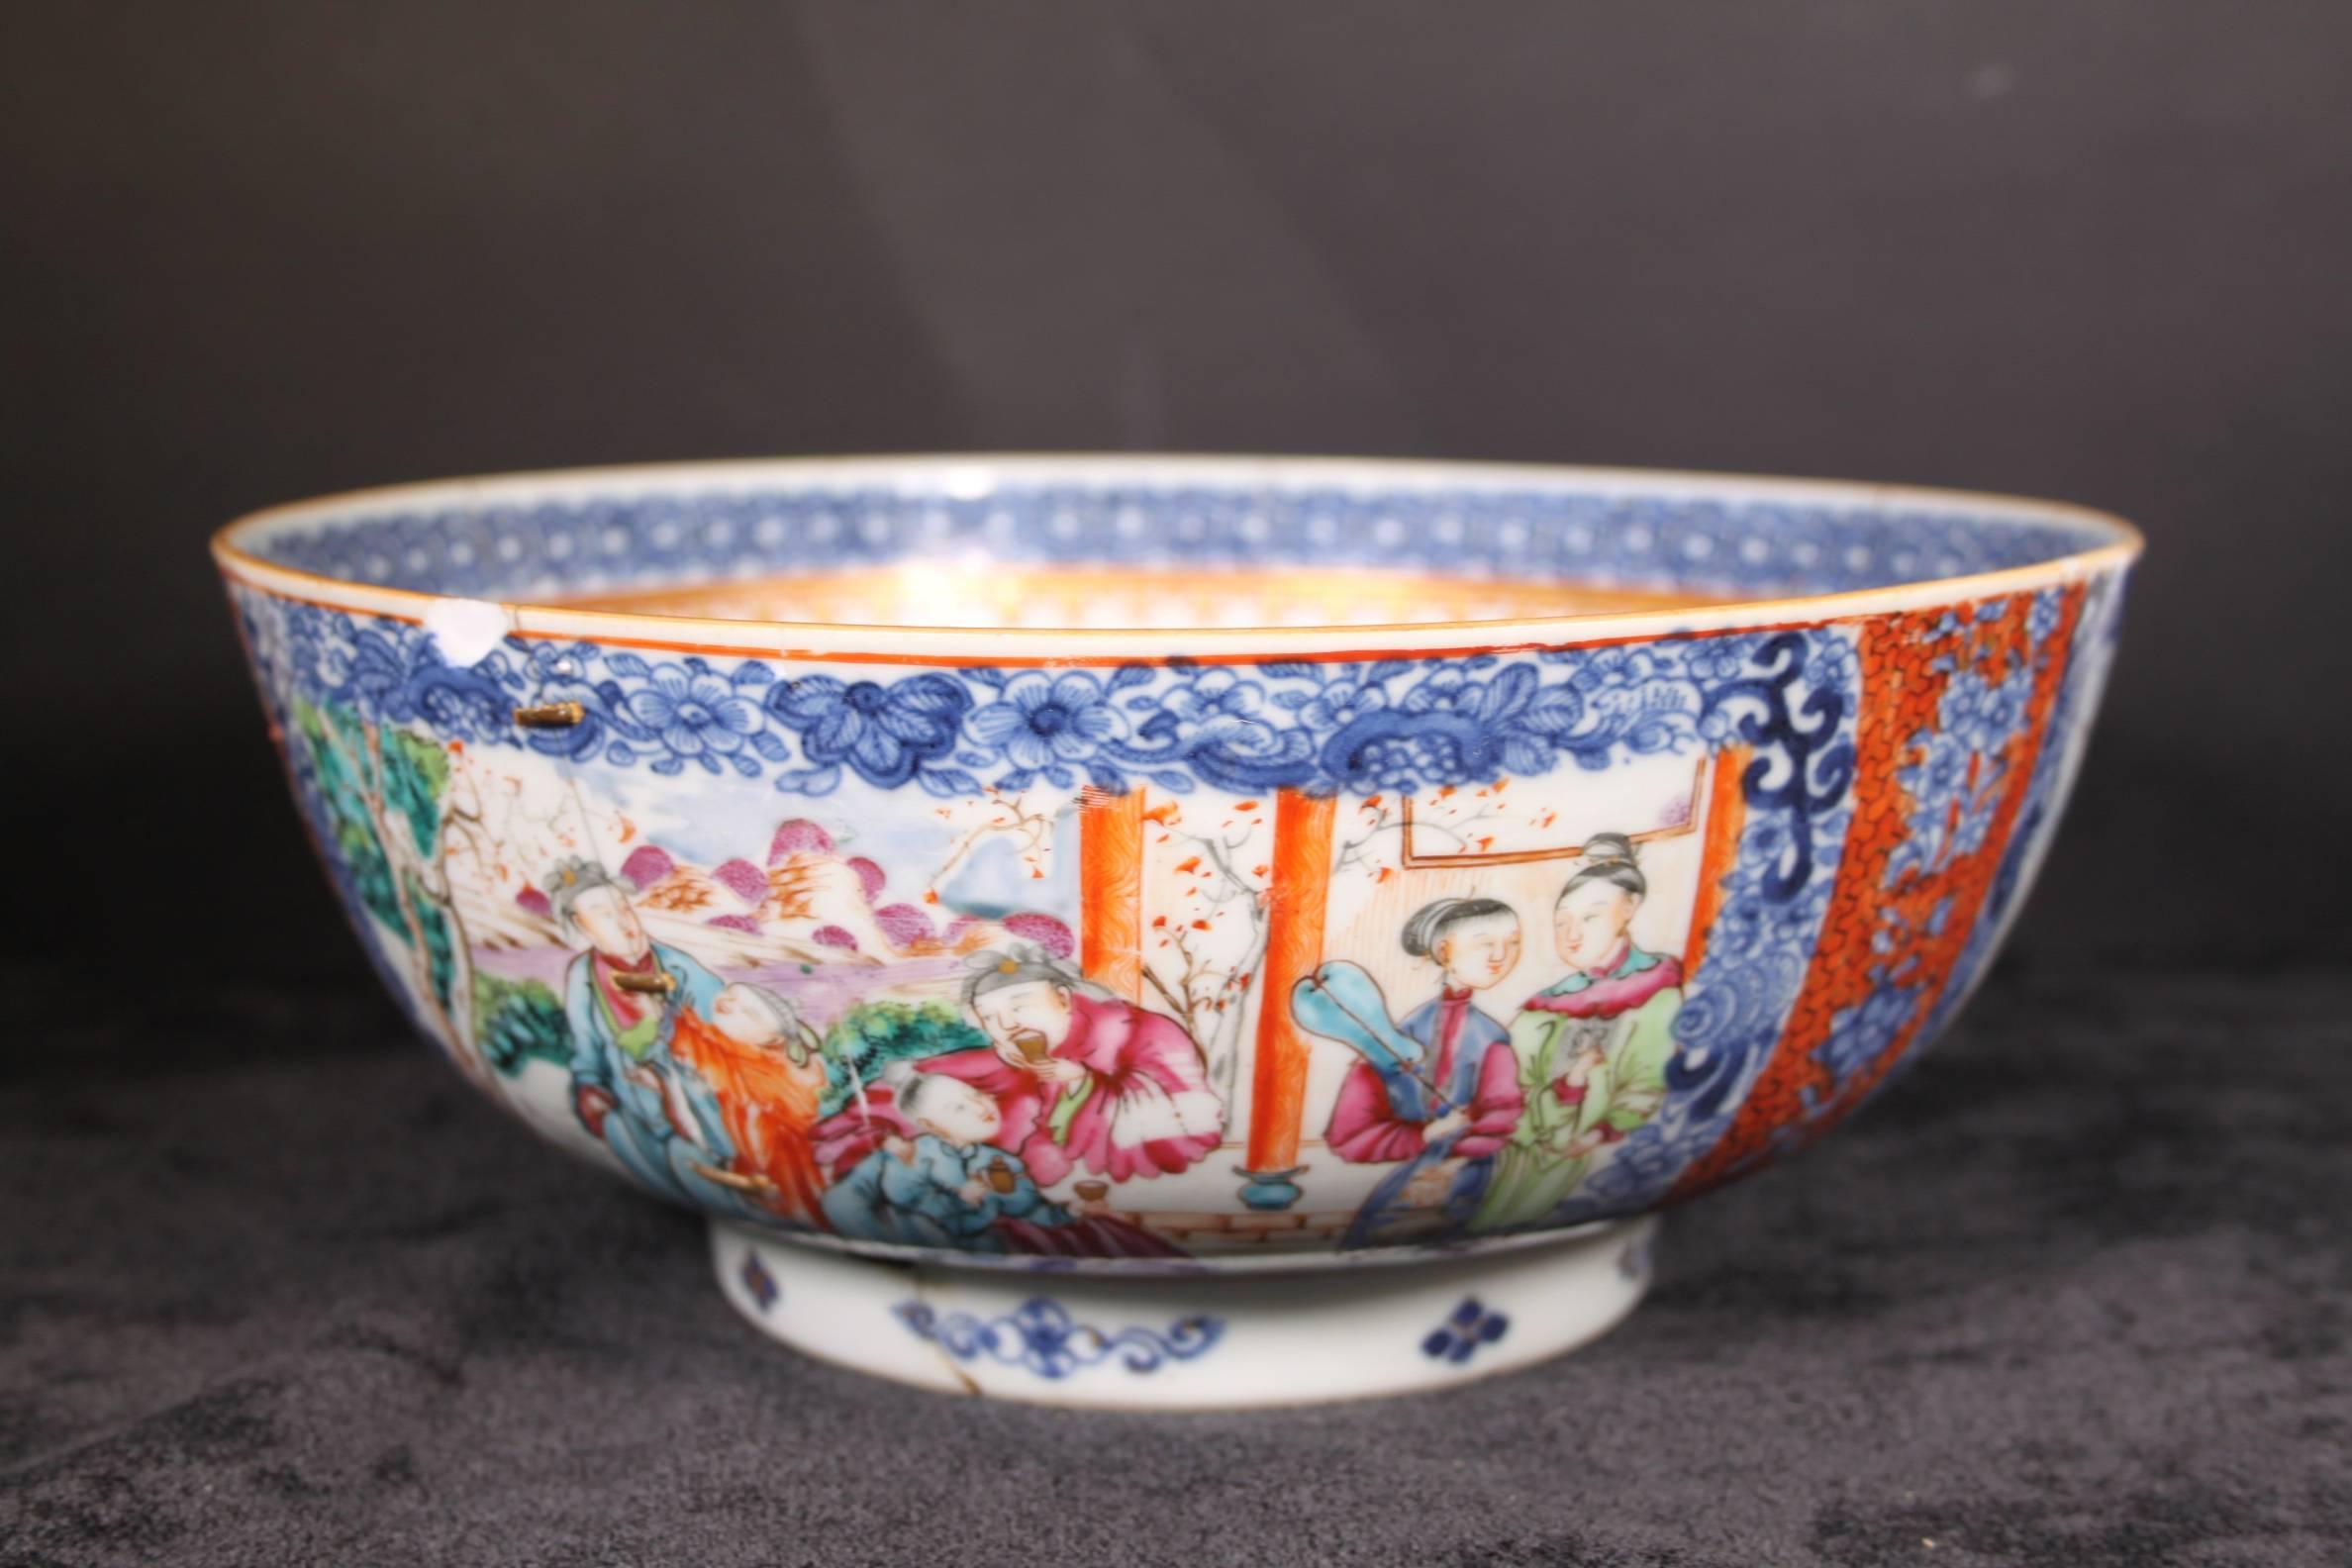 18th Century Qianlong Qing Dynasty Chinese Export Ware Porcelain Punch Bowl In Fair Condition For Sale In Harrogate, GB